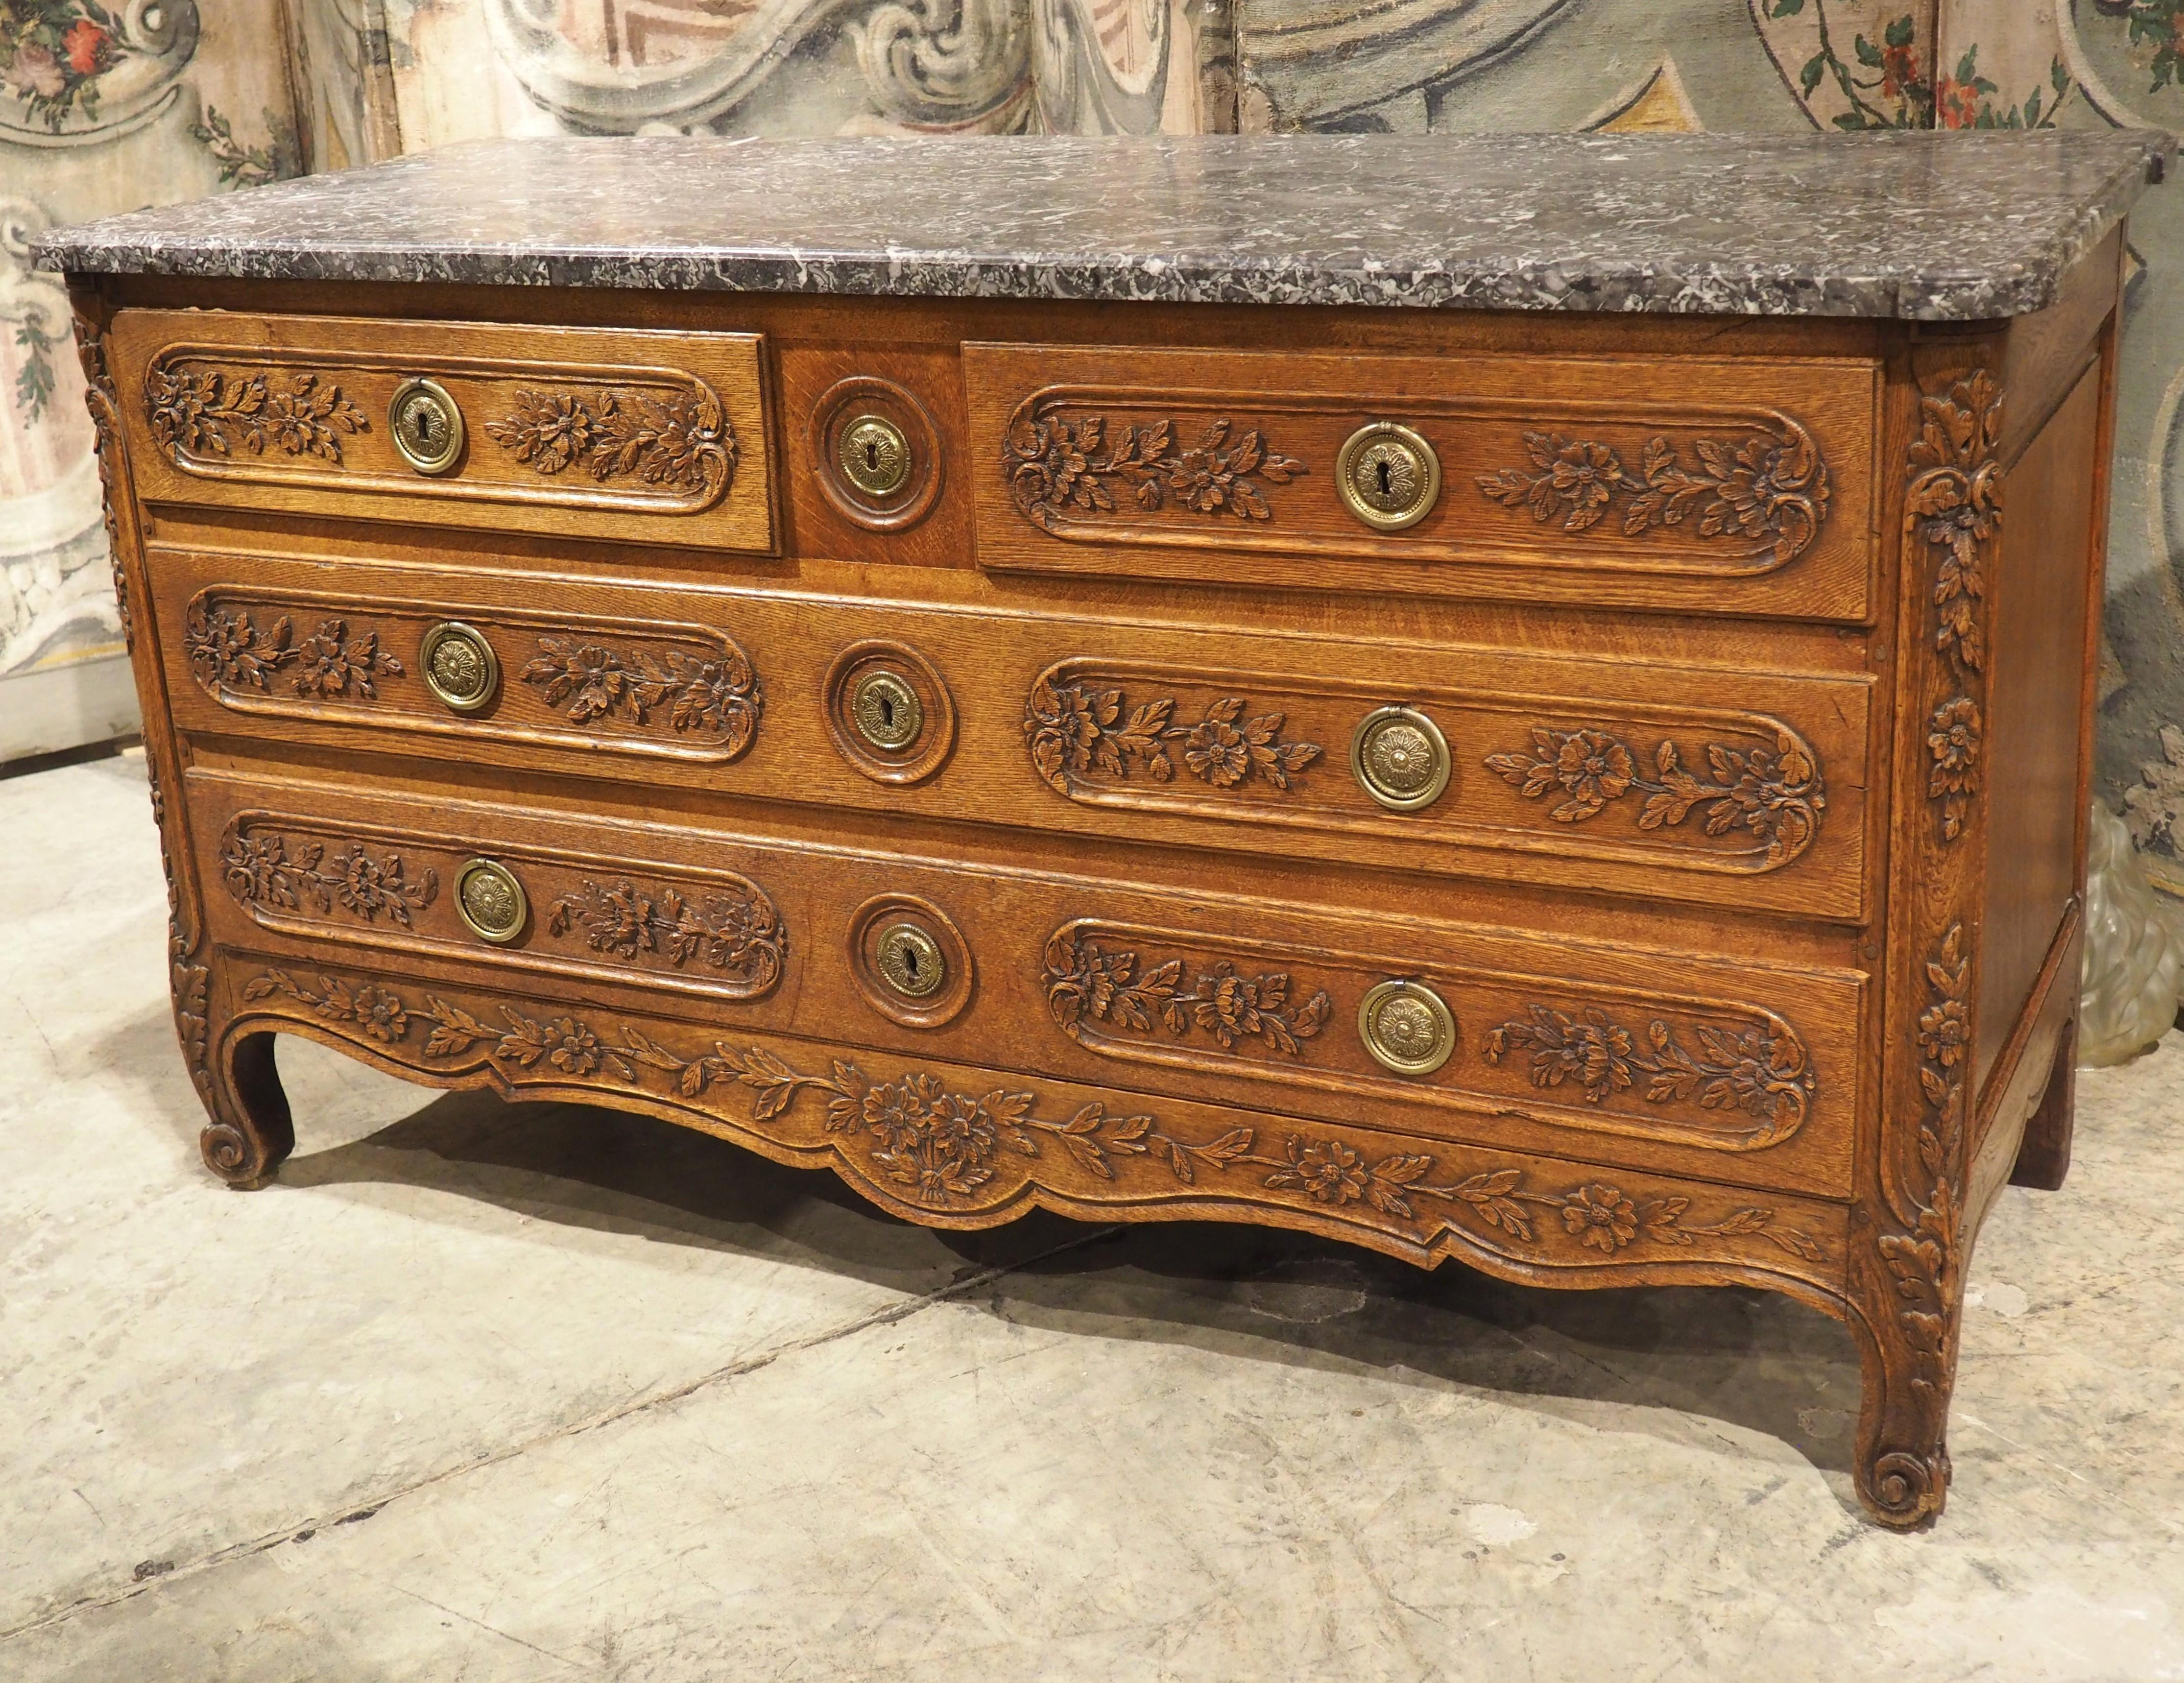 A rather unusual French commode, given the approximate width of 60 inches, this sculpted oak chest of drawers was hand-carved circa 1860. A relatively thin (1 1/8 inch in depth) original marble top enhances the elongated appearance by gently